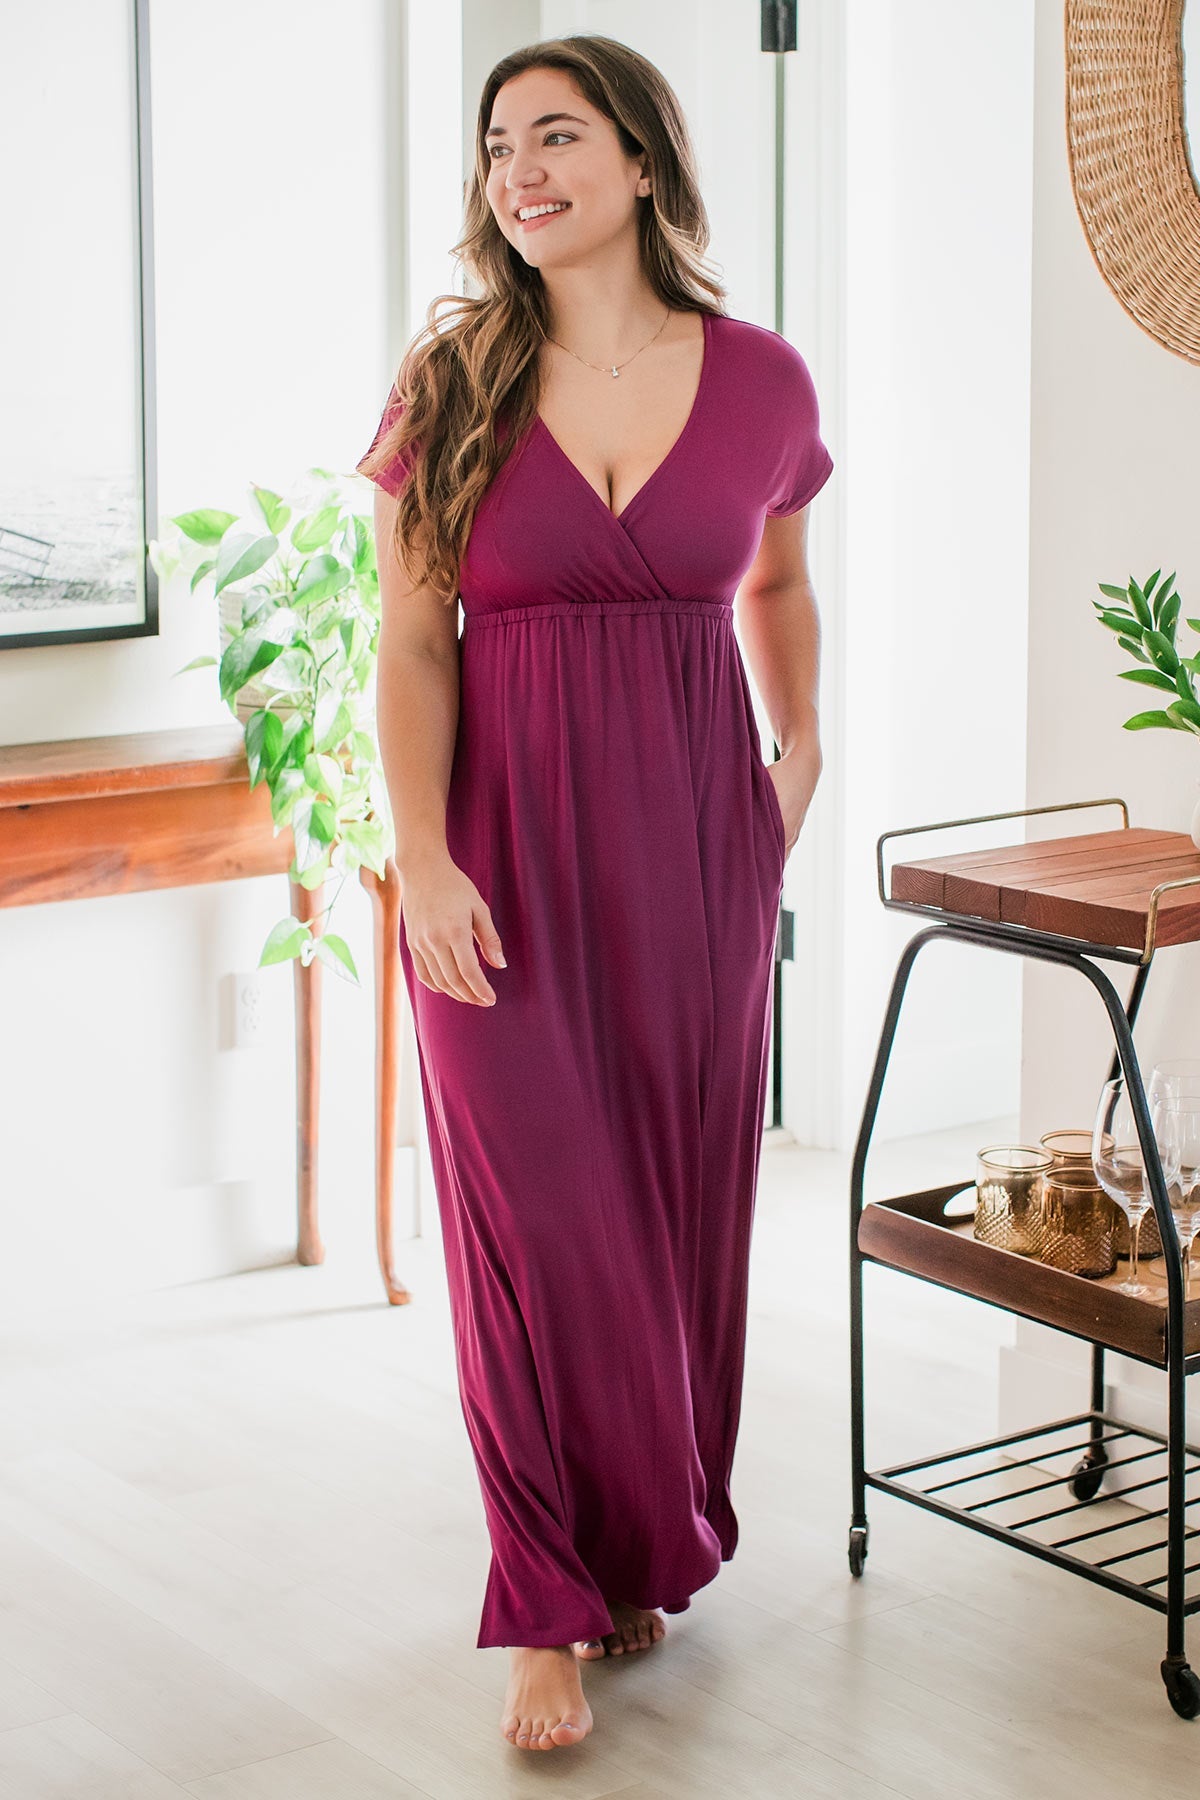 A woman standing with one hand in her pocket and looking off to the side with a smile on her face, wearing Zoey Crossover Bamboo Maxi Dress in Boysenberry